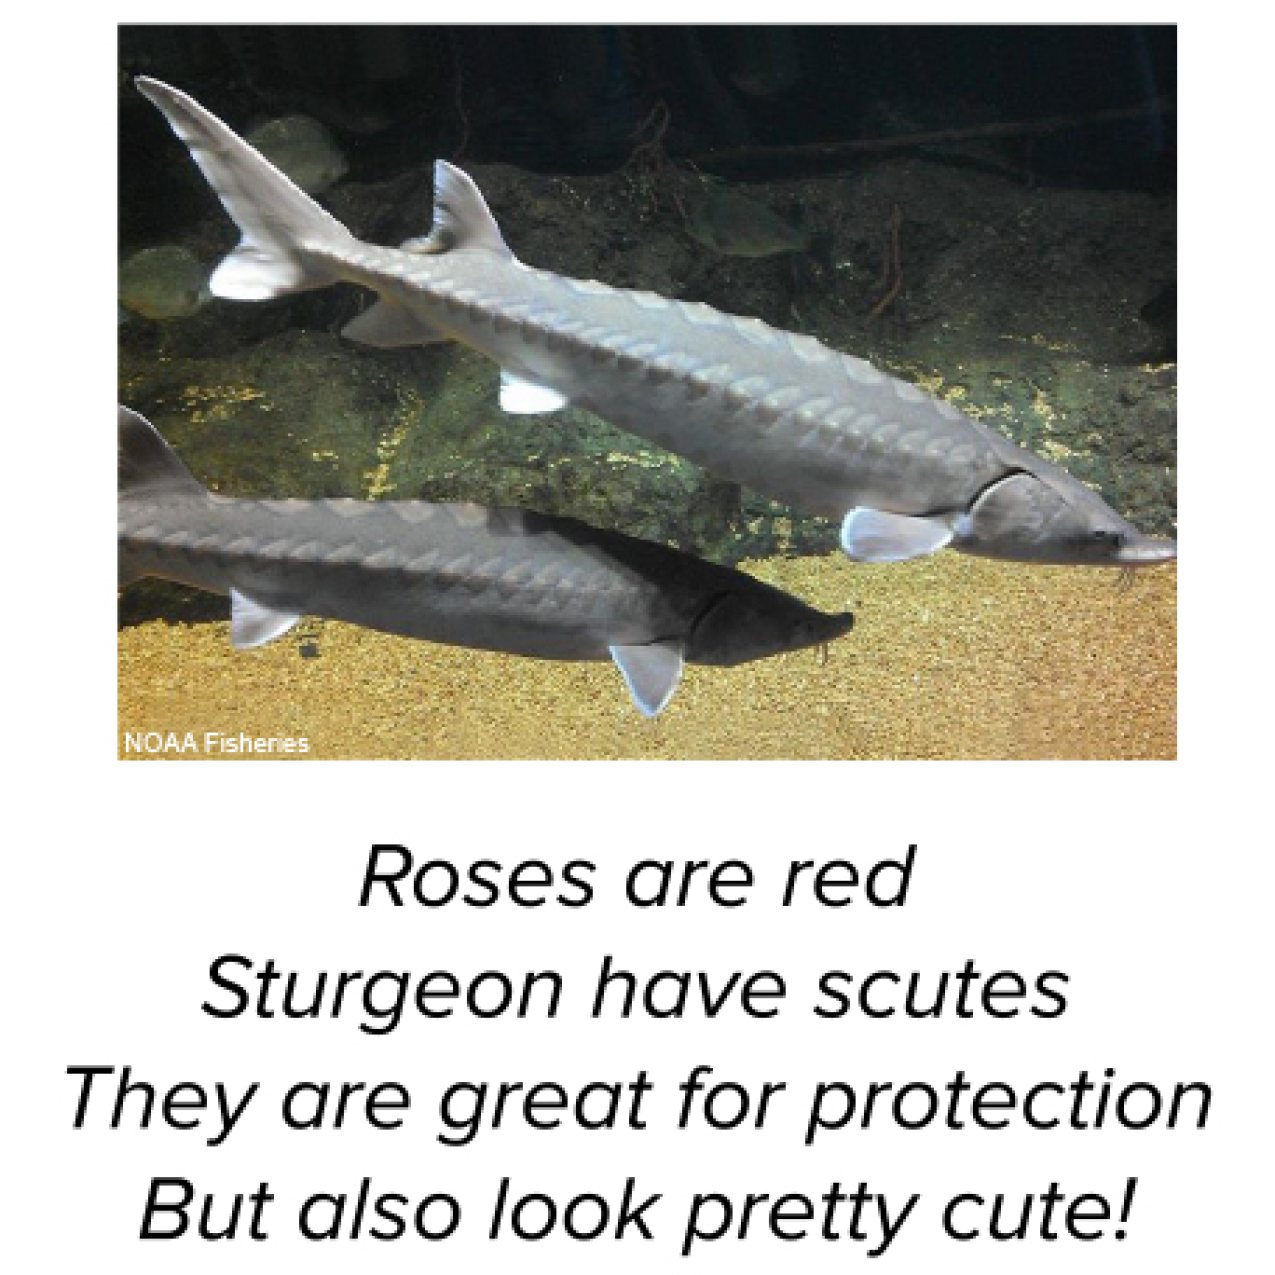 A printable two-sided valentine. The front side has a photo of two sturgeon fish and reads “Roses are red, sturgeon have scutes. They are great for protection, but also look pretty cute!” The back side reads “Atlantic sturgeon have bony scutes that are very sharp when they are juveniles to avoid predation. As they grow older and much larger (adults are nearly 14 feet long!), their scutes become more dull; by then, they have fewer aquatic predators.” Link: https://go.usa.gov/xdTGQ